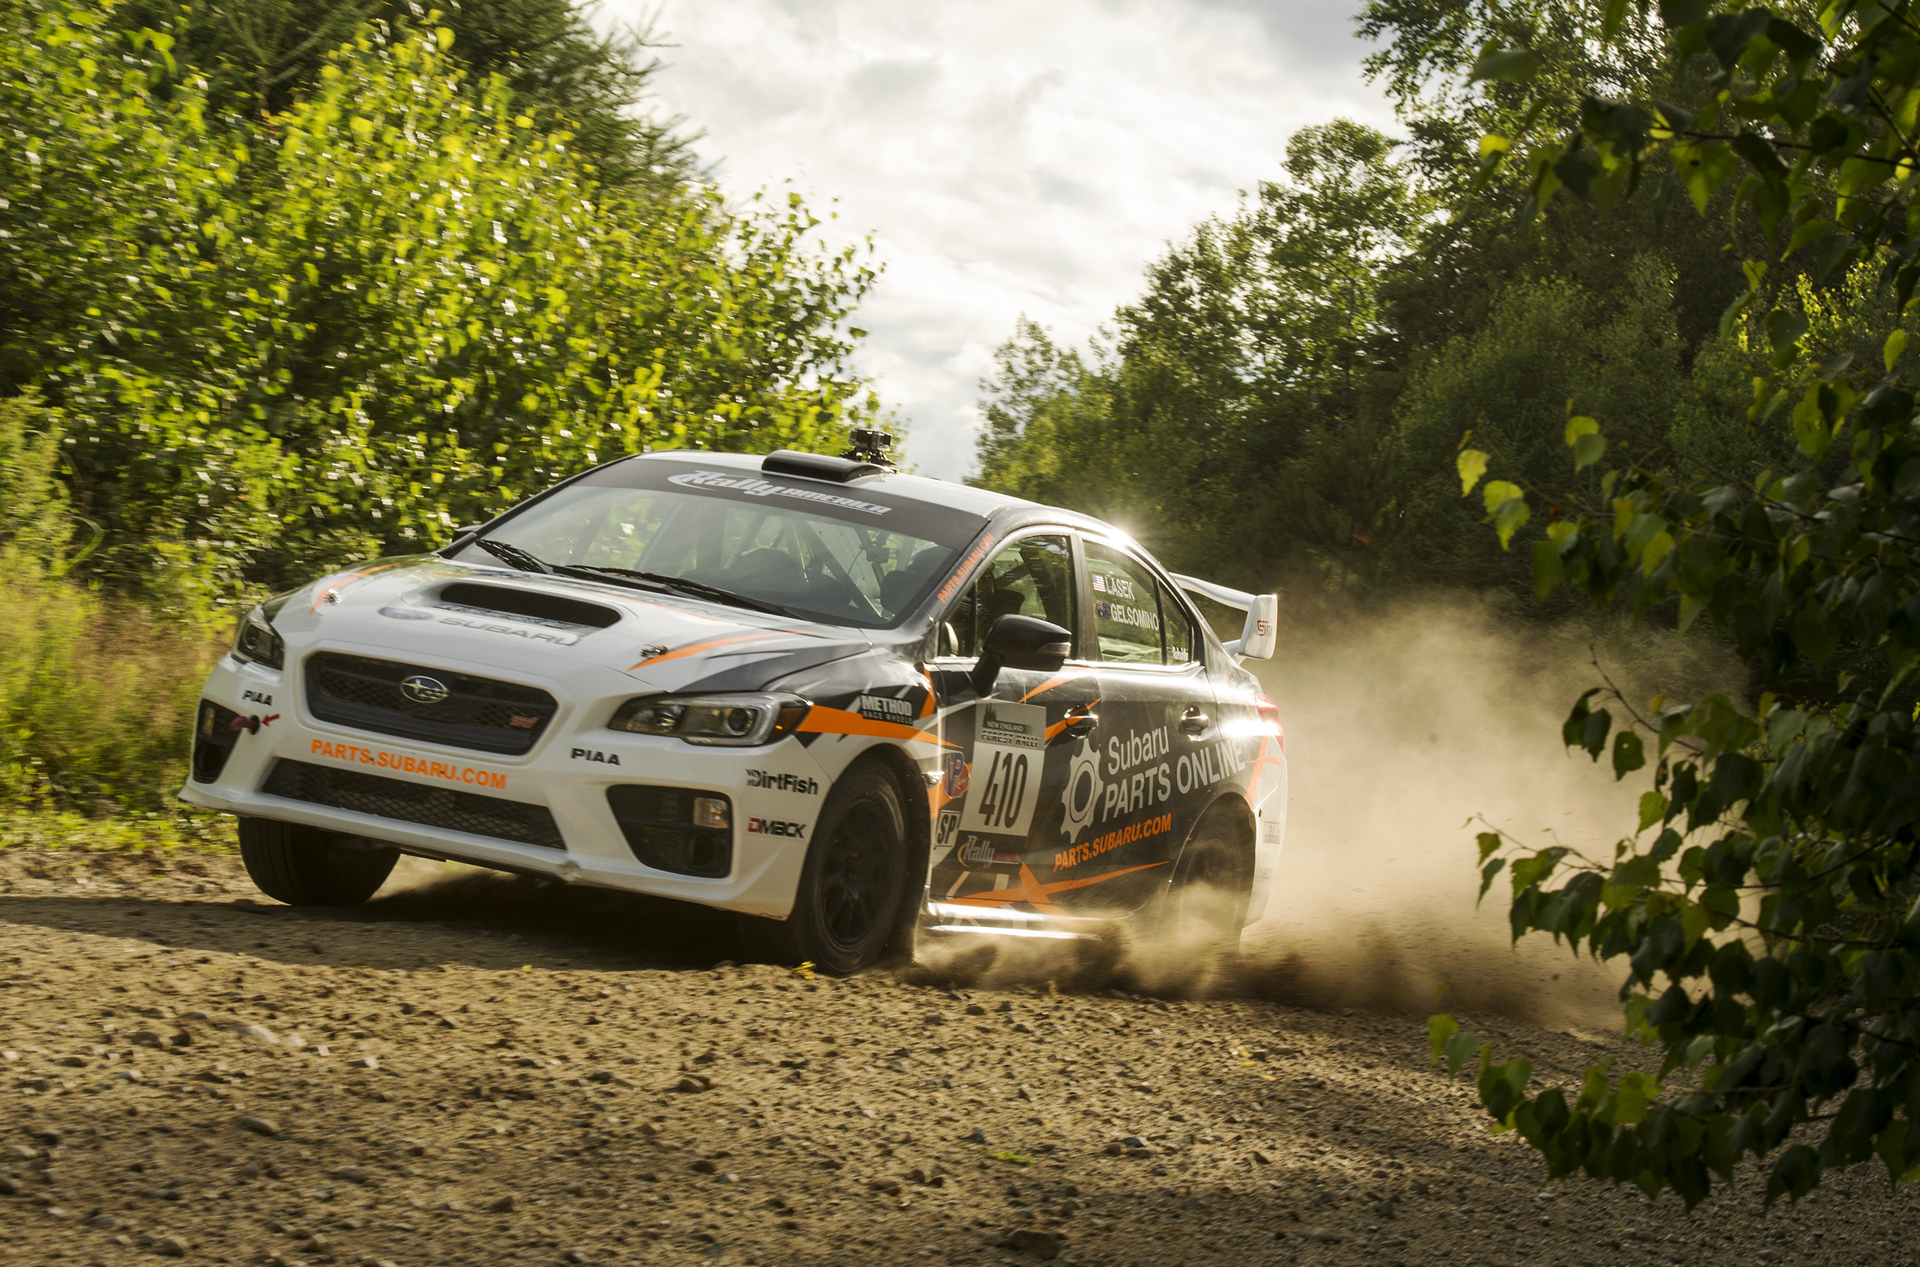 Bucky Lasek maintained a smooth and consistent pace to nab a podium spot at New England Forest Rally © Fuji Heavy Industries, Ltd.